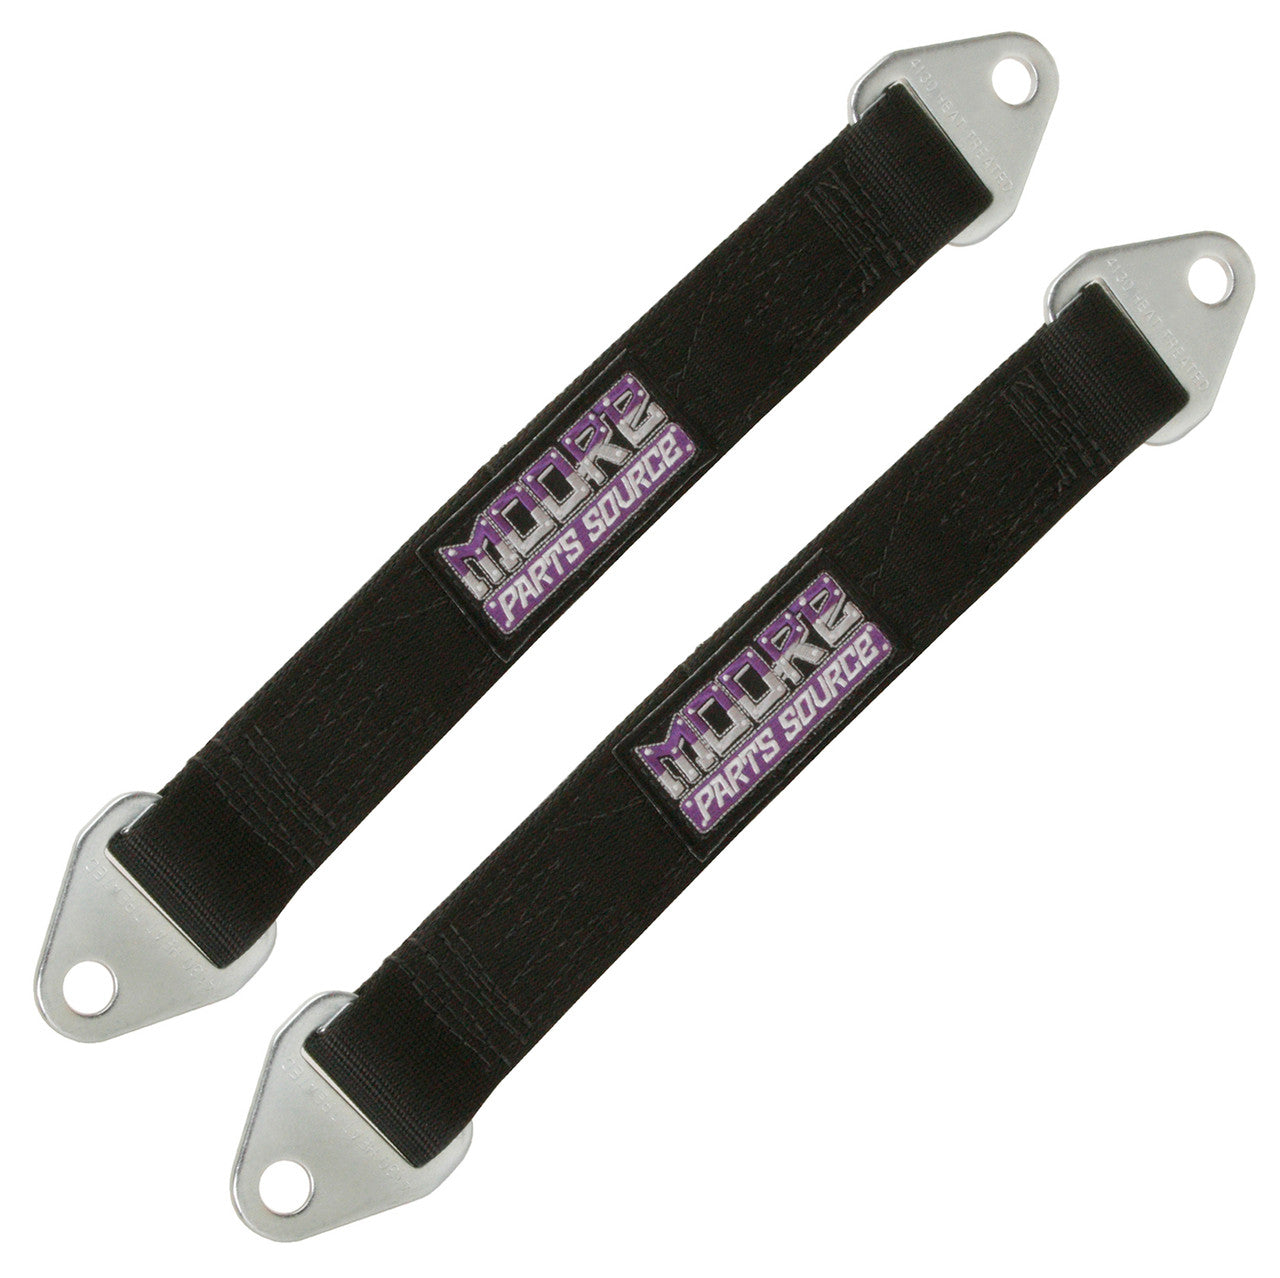 19 Inch USA Made Off-Road Suspension Limit Straps, Sold As Pair